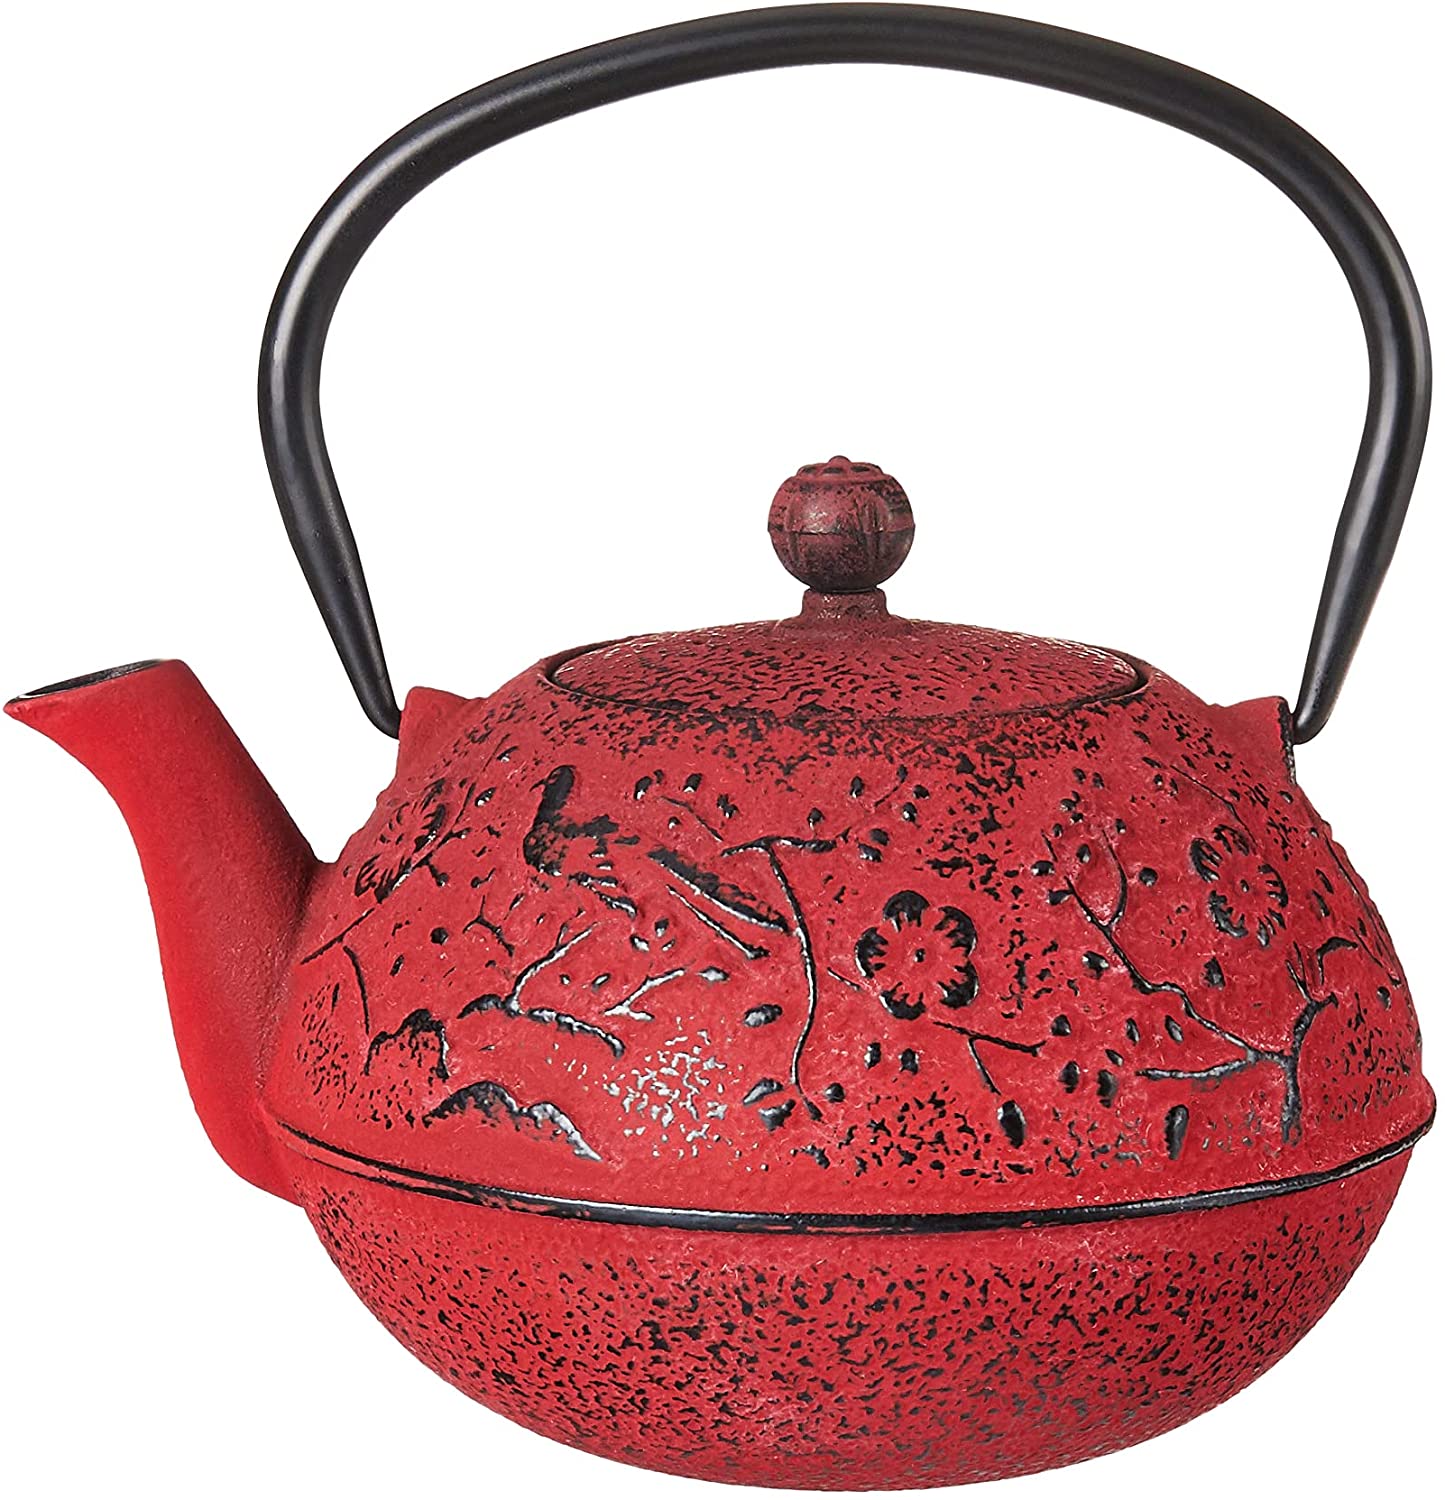 red iron tea pot with floral pattern